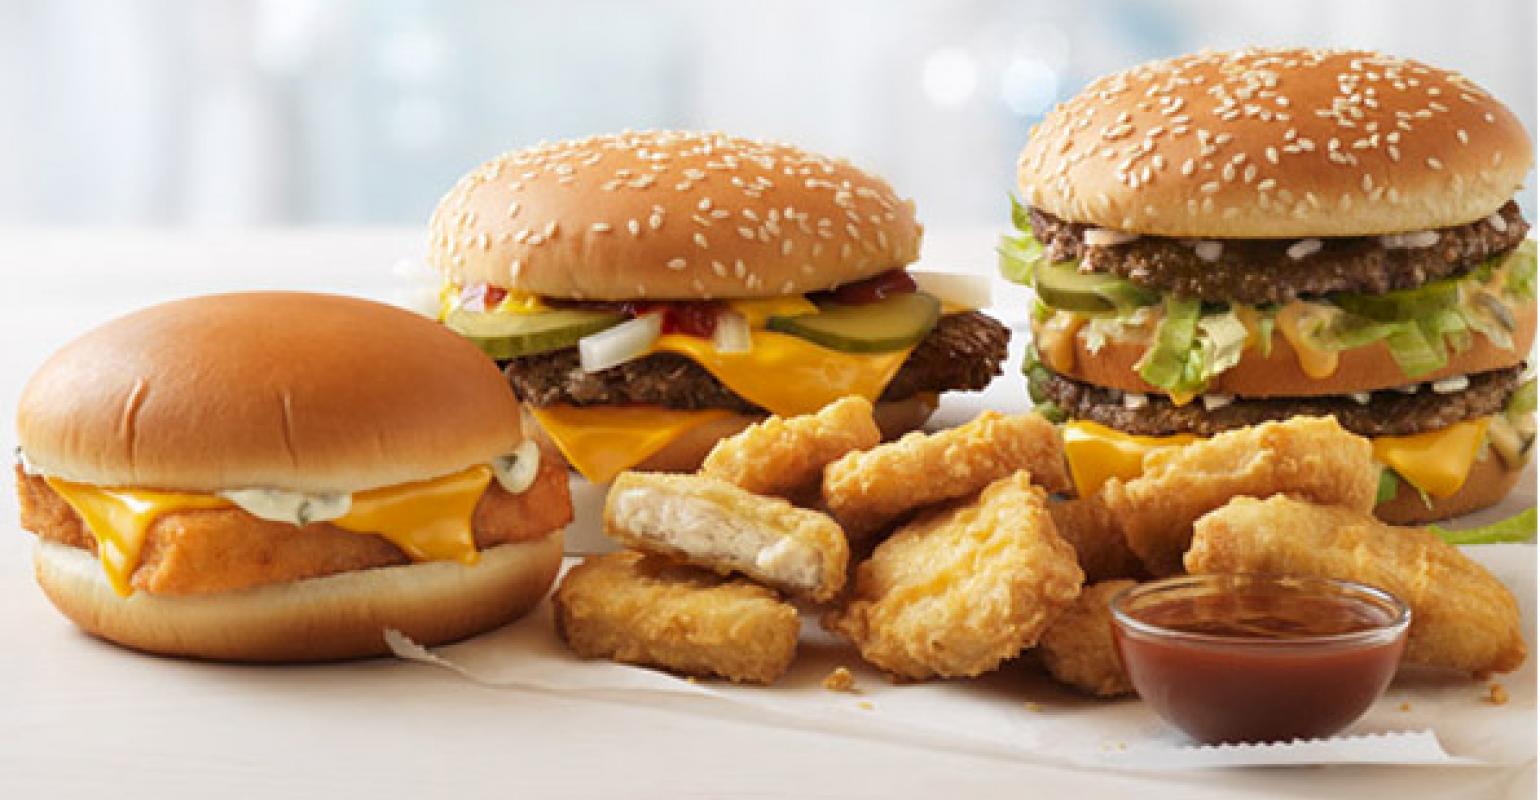 Report: Quick-service burger chains compete with combo meals